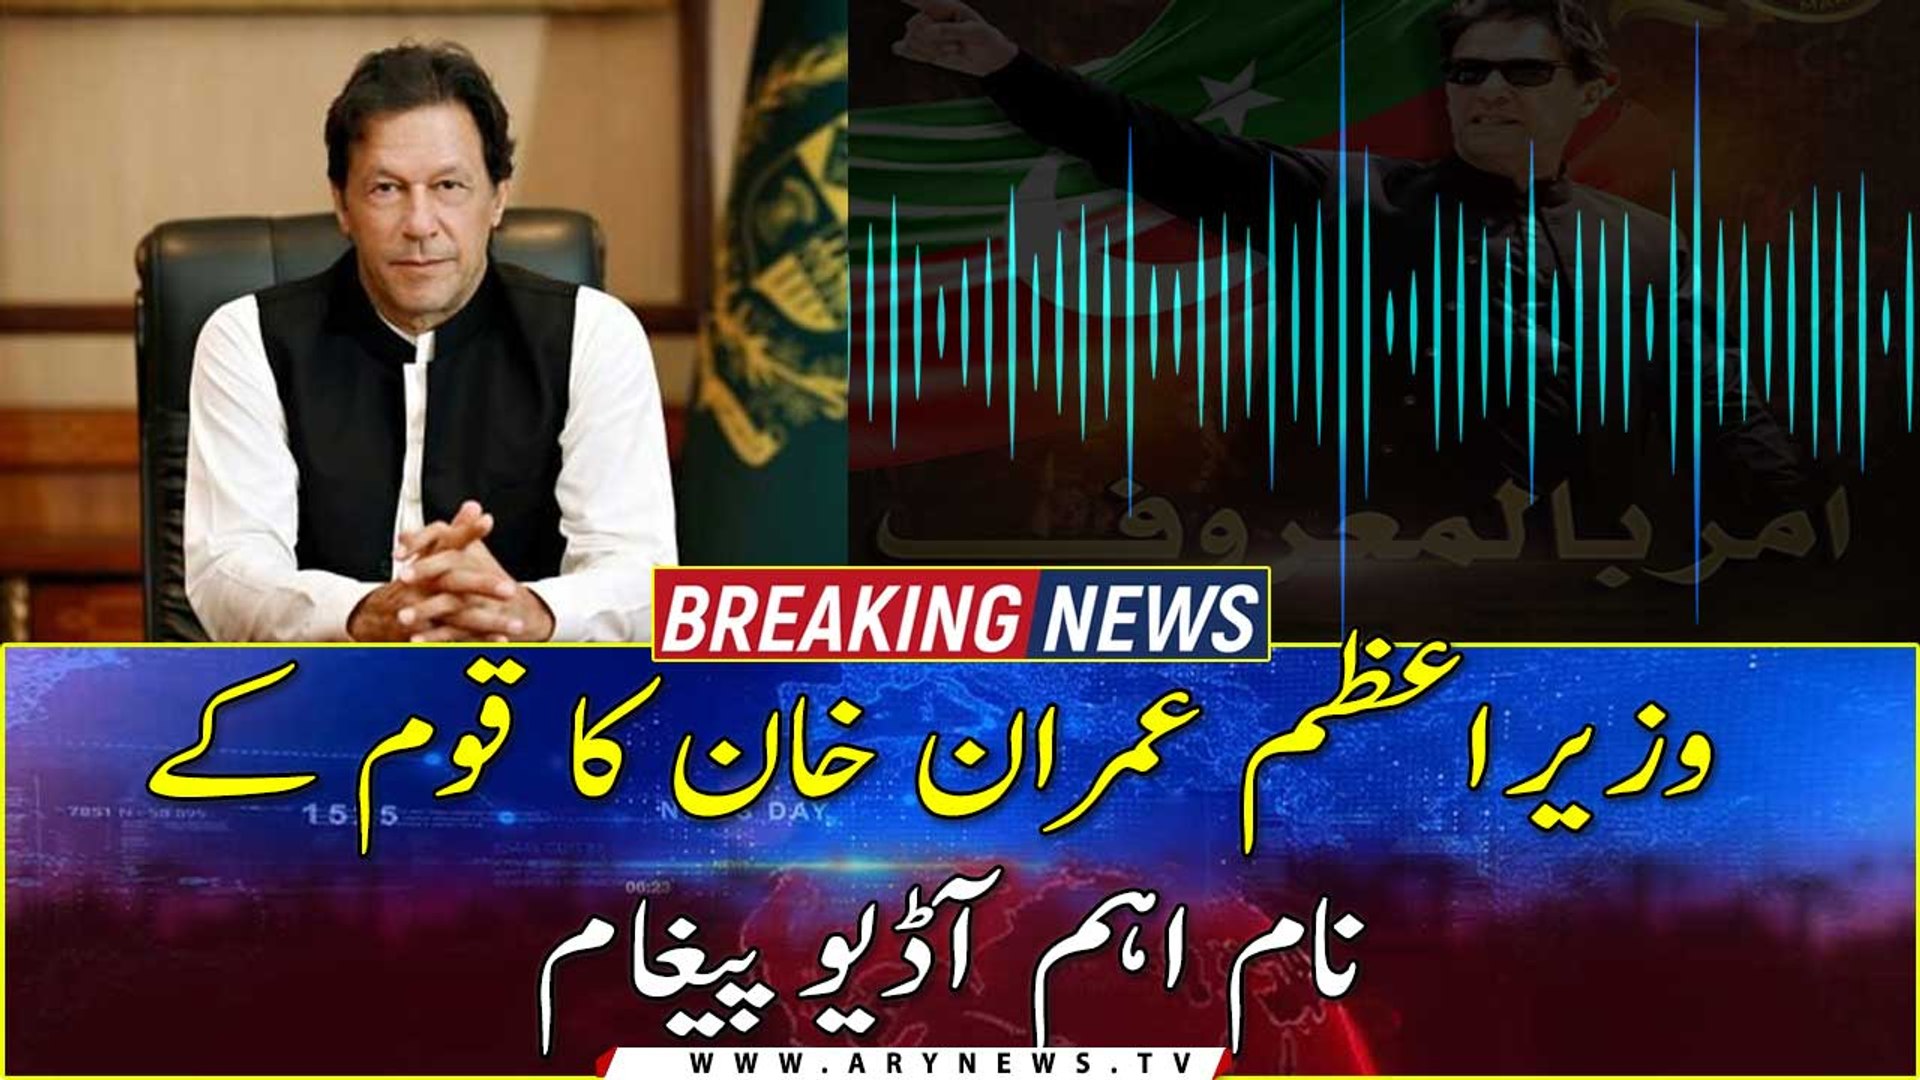 Prime Minister Imran Khan's important audio message to the nation - video  Dailymotion